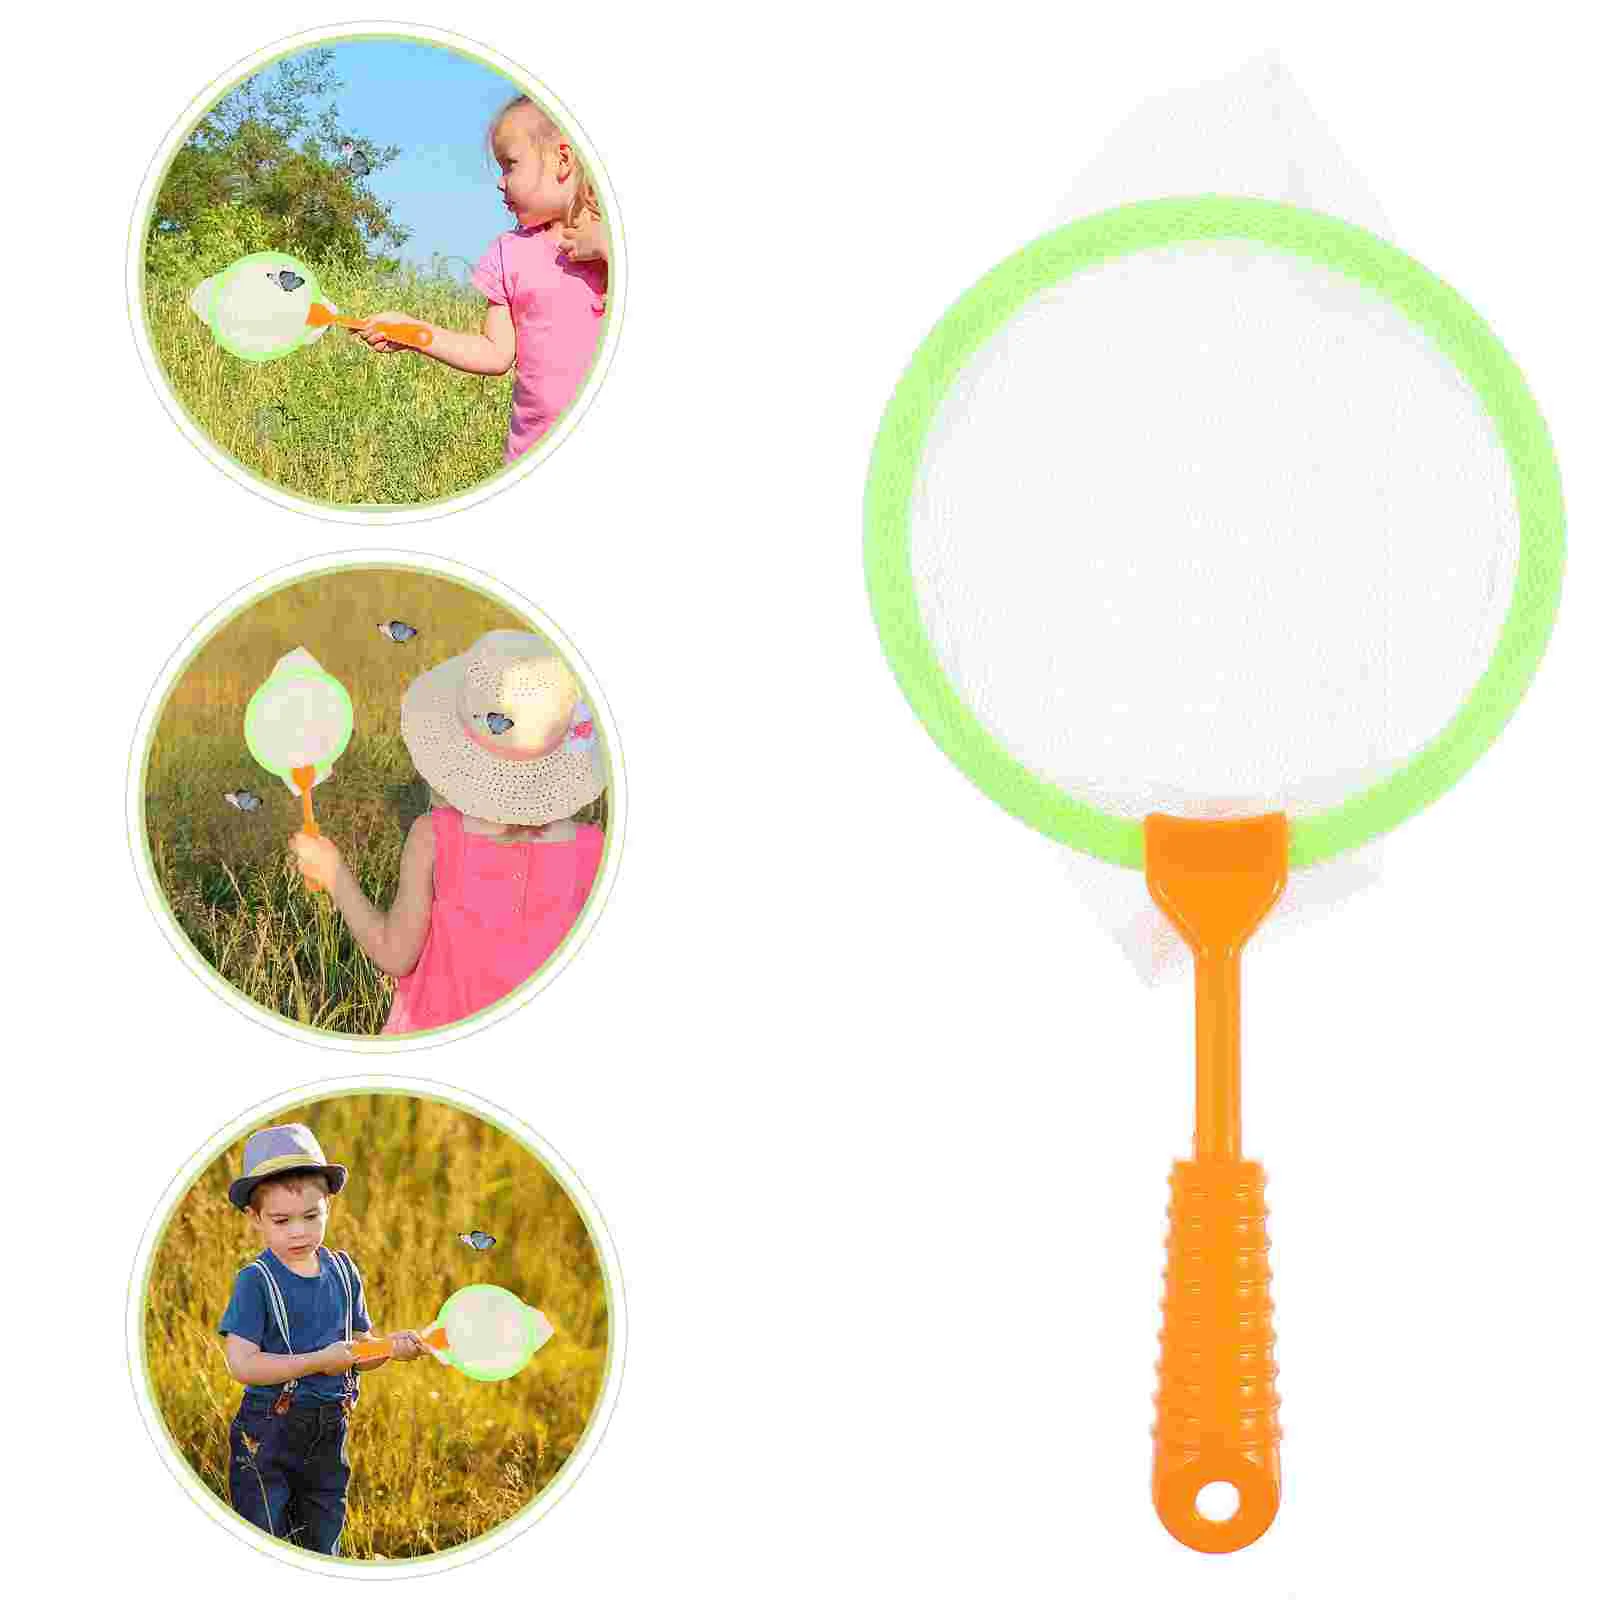 

4 Pcs Bath Toys Insect Collecting Net Tool Park Fishing Tools Plastic Large Nets Kids Bug Catcher Child Adventure Collection